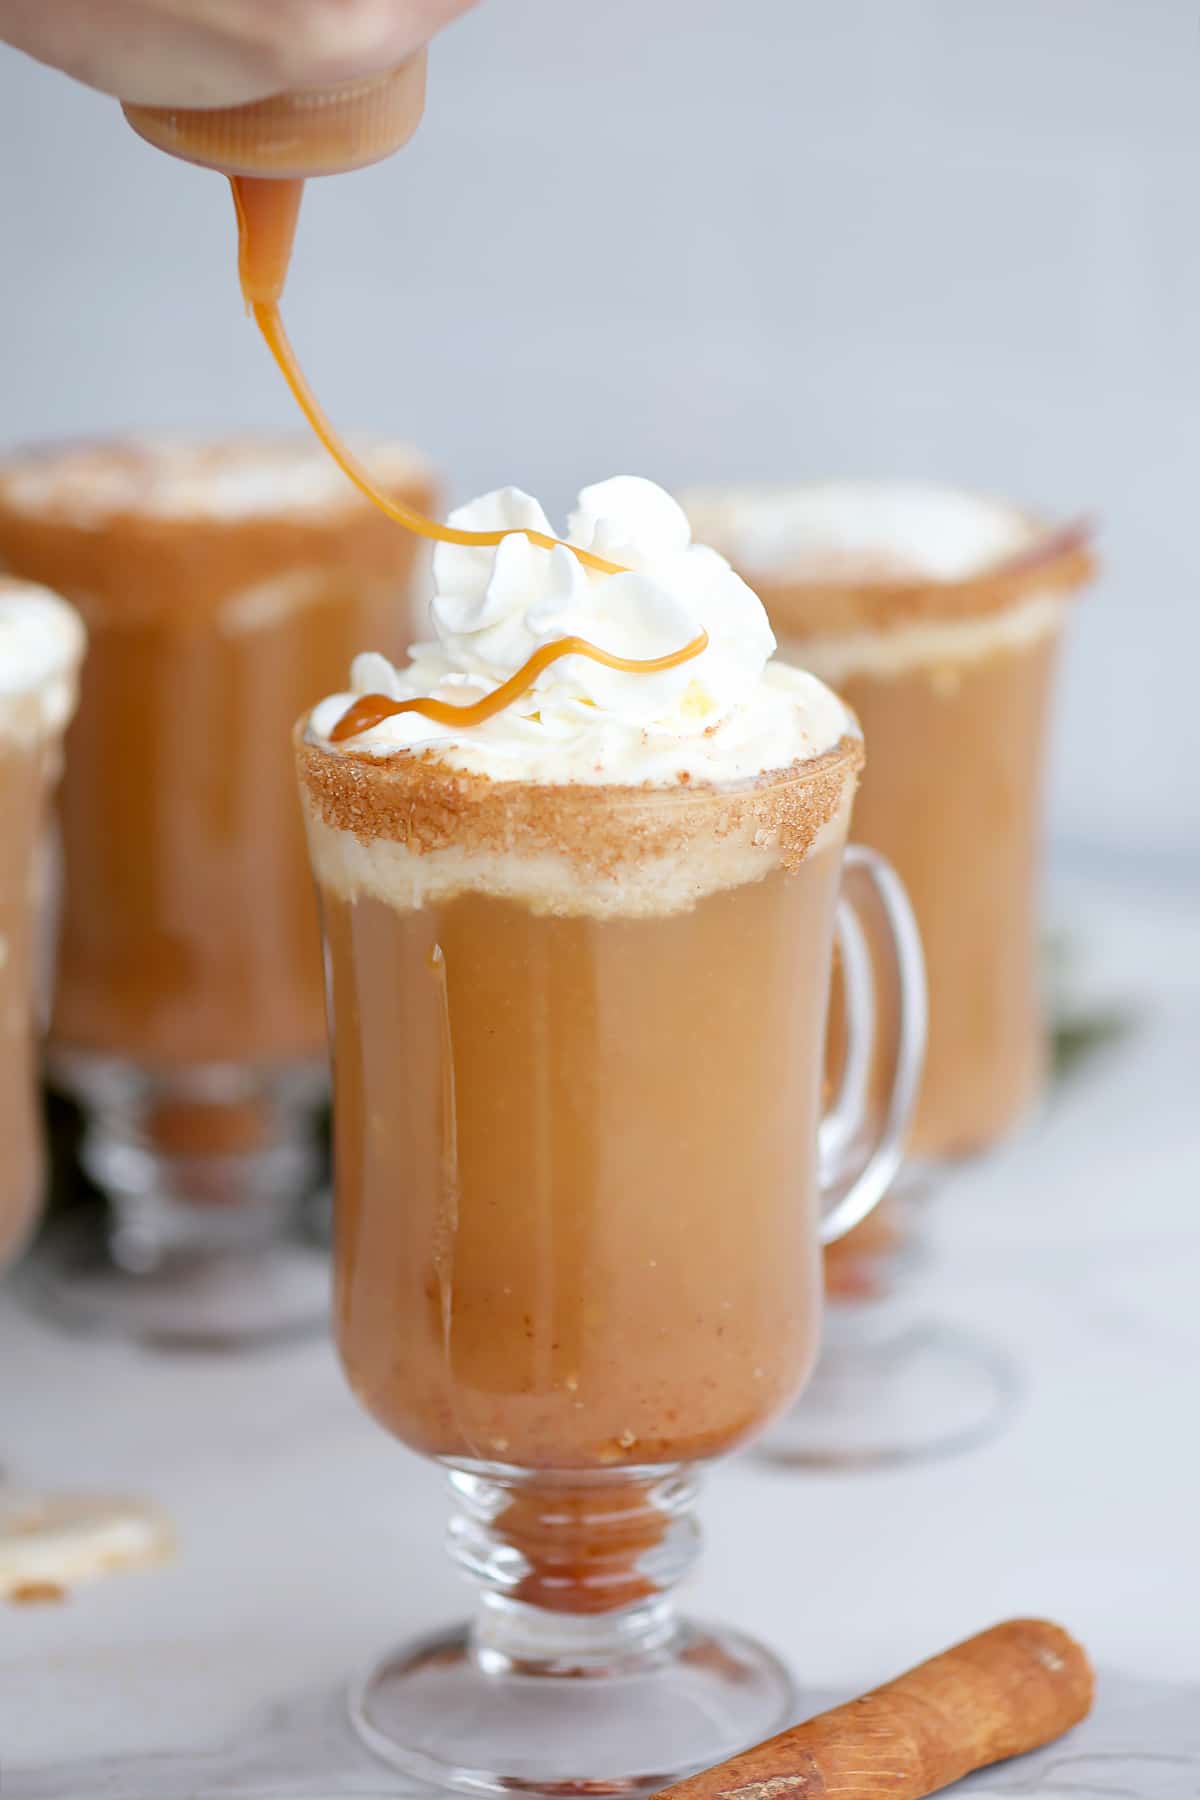 Homemade apple cider in a clear mug with whipped cream, a ribbon of caramel is being drizzled on top.